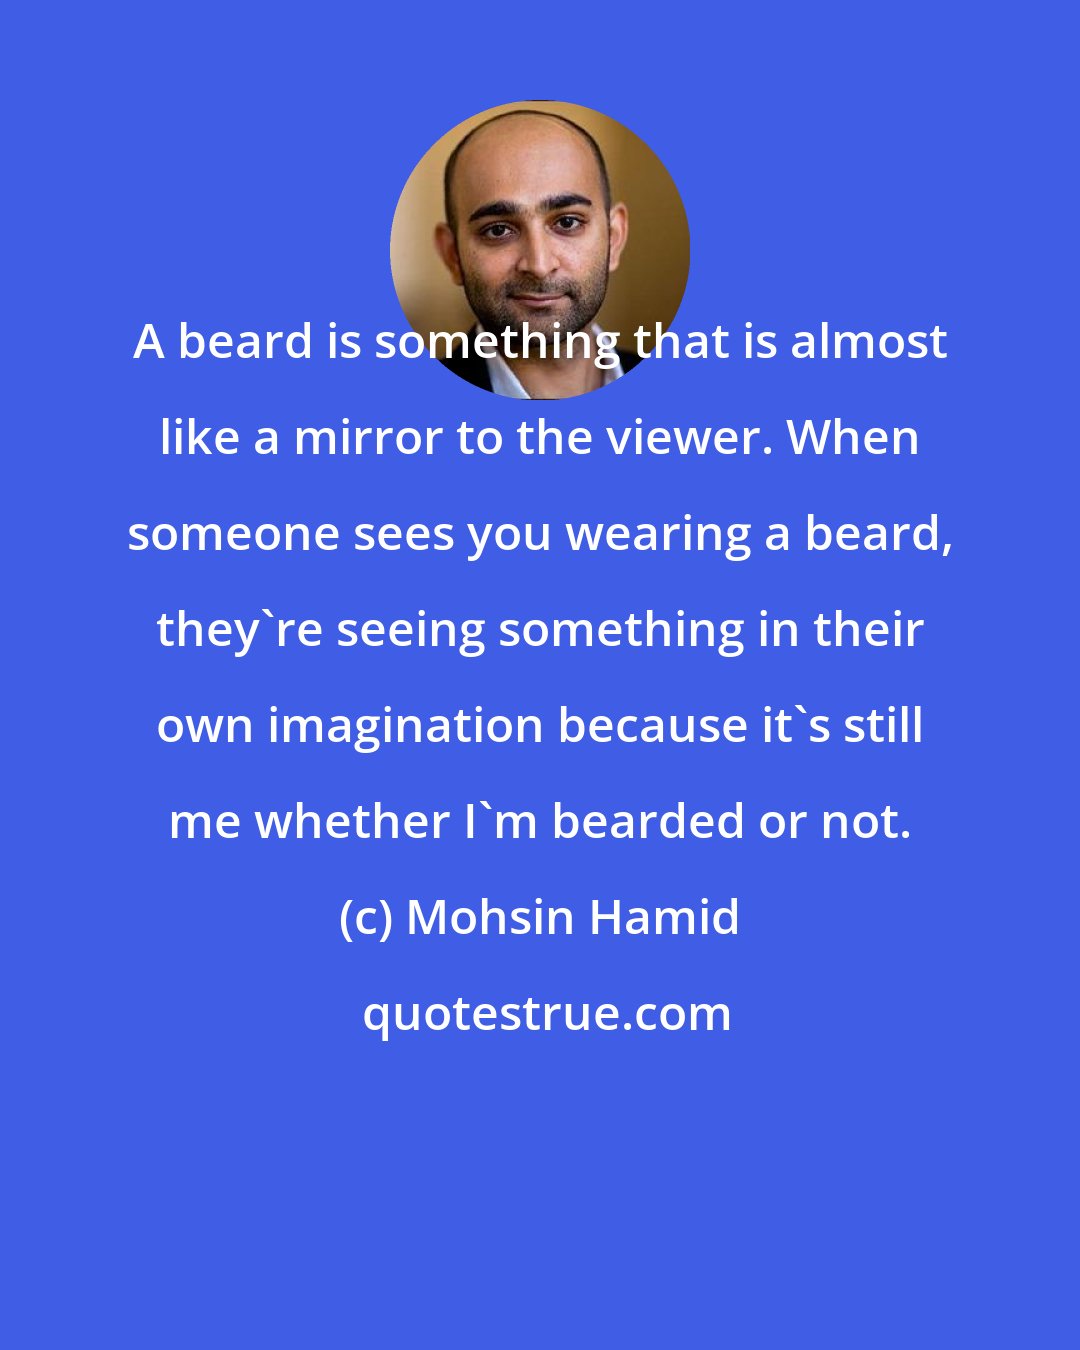 Mohsin Hamid: A beard is something that is almost like a mirror to the viewer. When someone sees you wearing a beard, they're seeing something in their own imagination because it's still me whether I'm bearded or not.